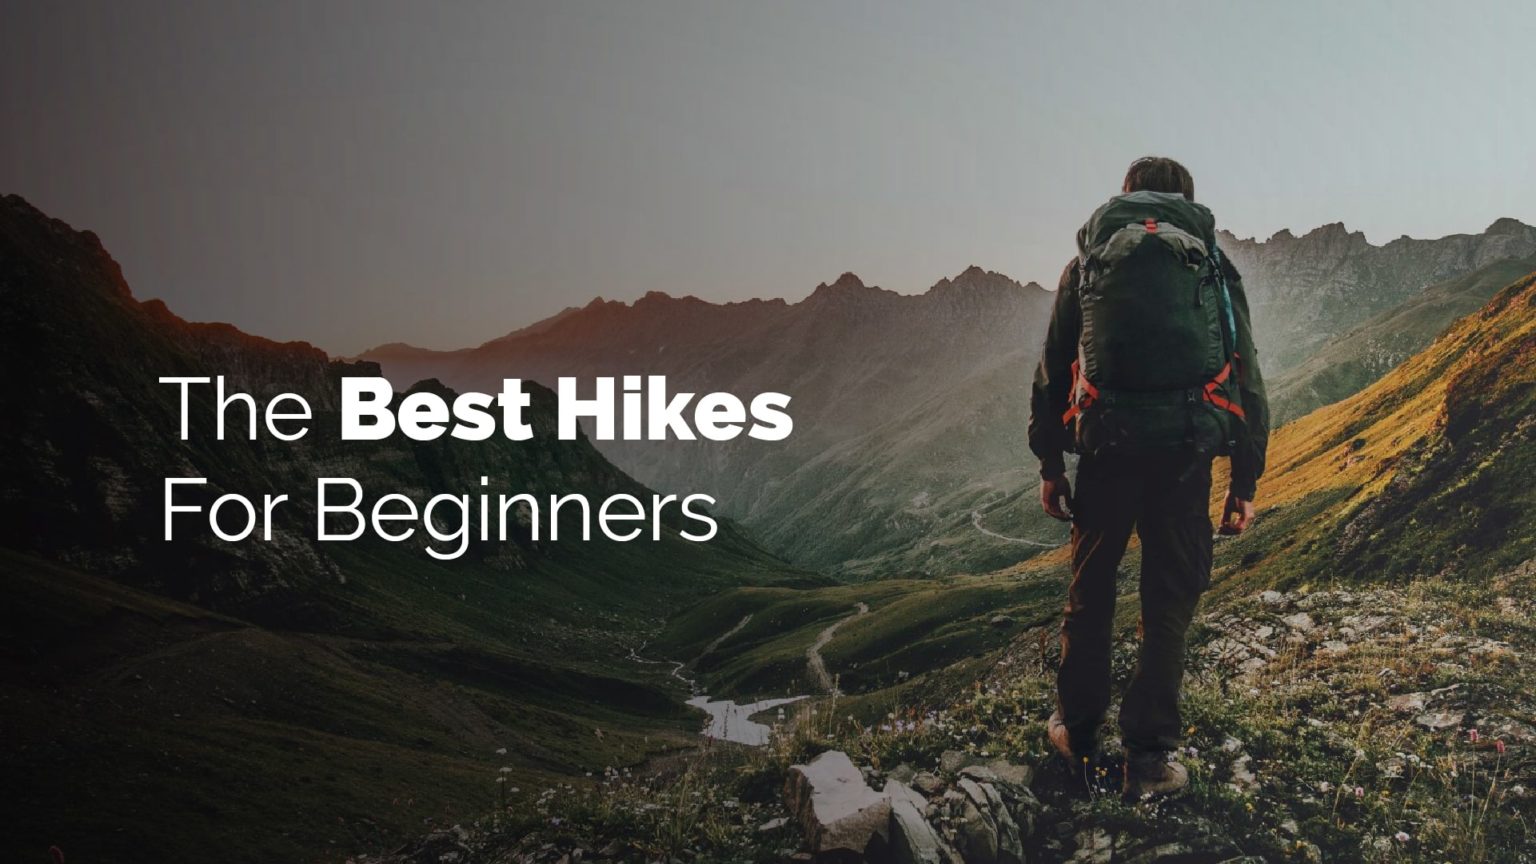 10 Simple Mountain Hikes For Beginners In The UK